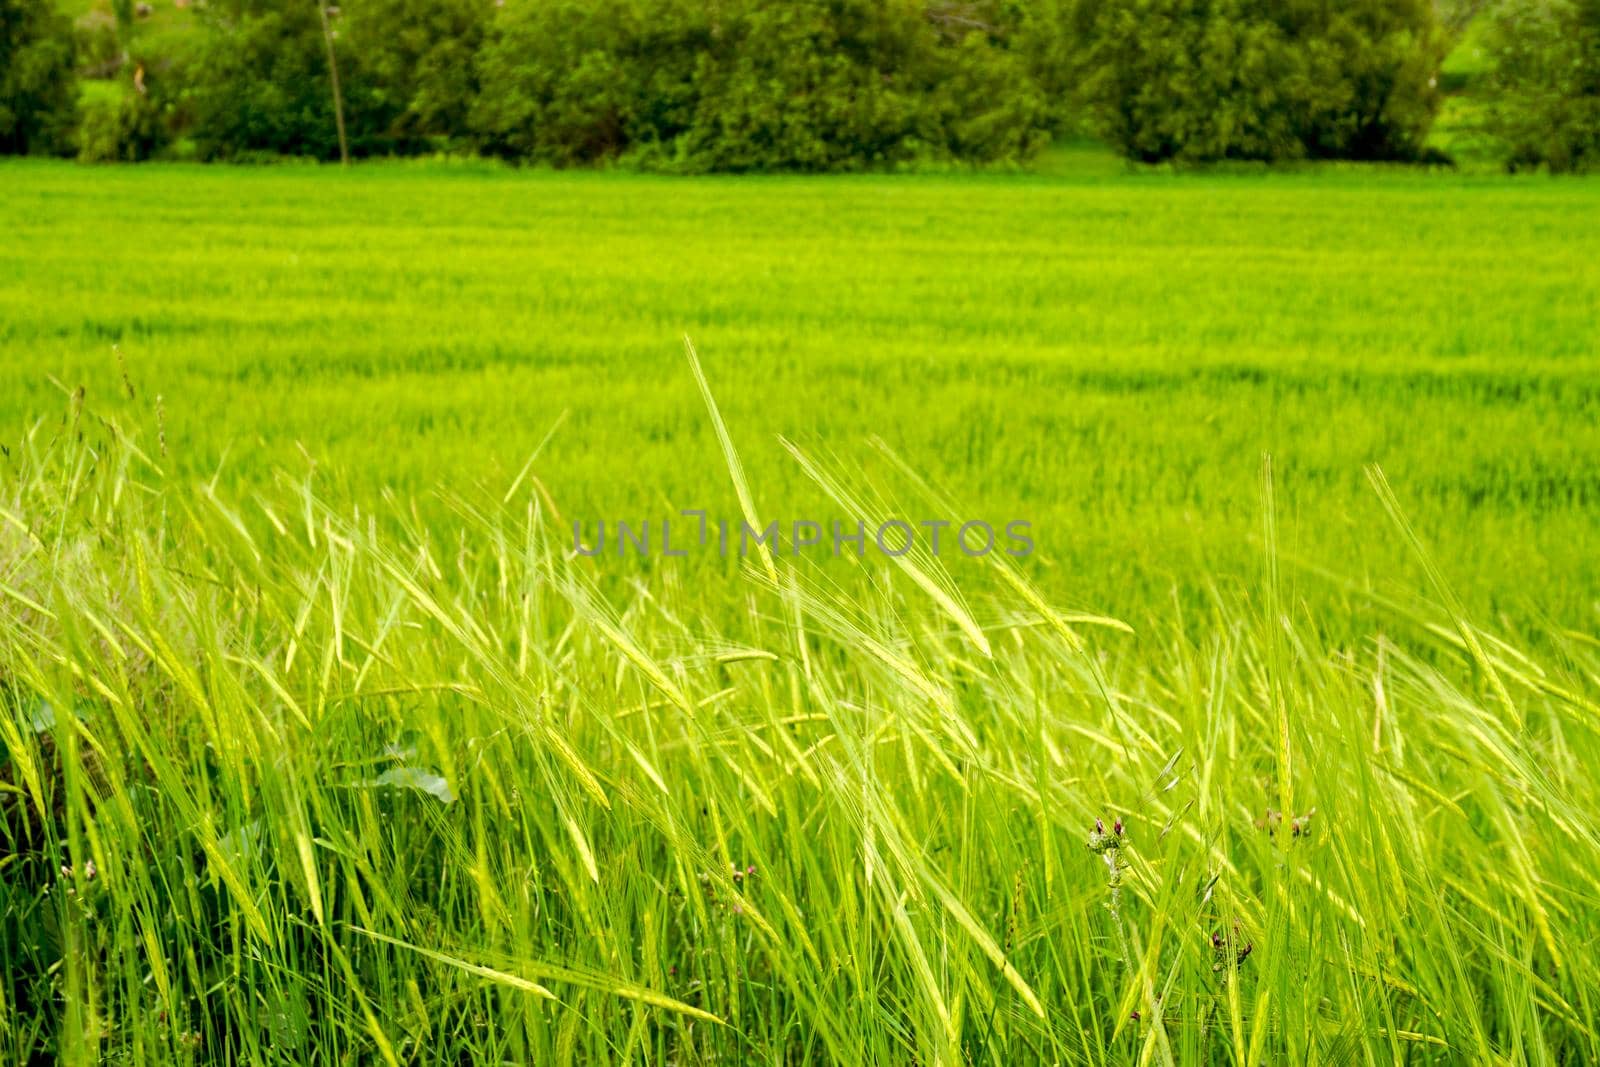 Green field of eat of wheat close up view